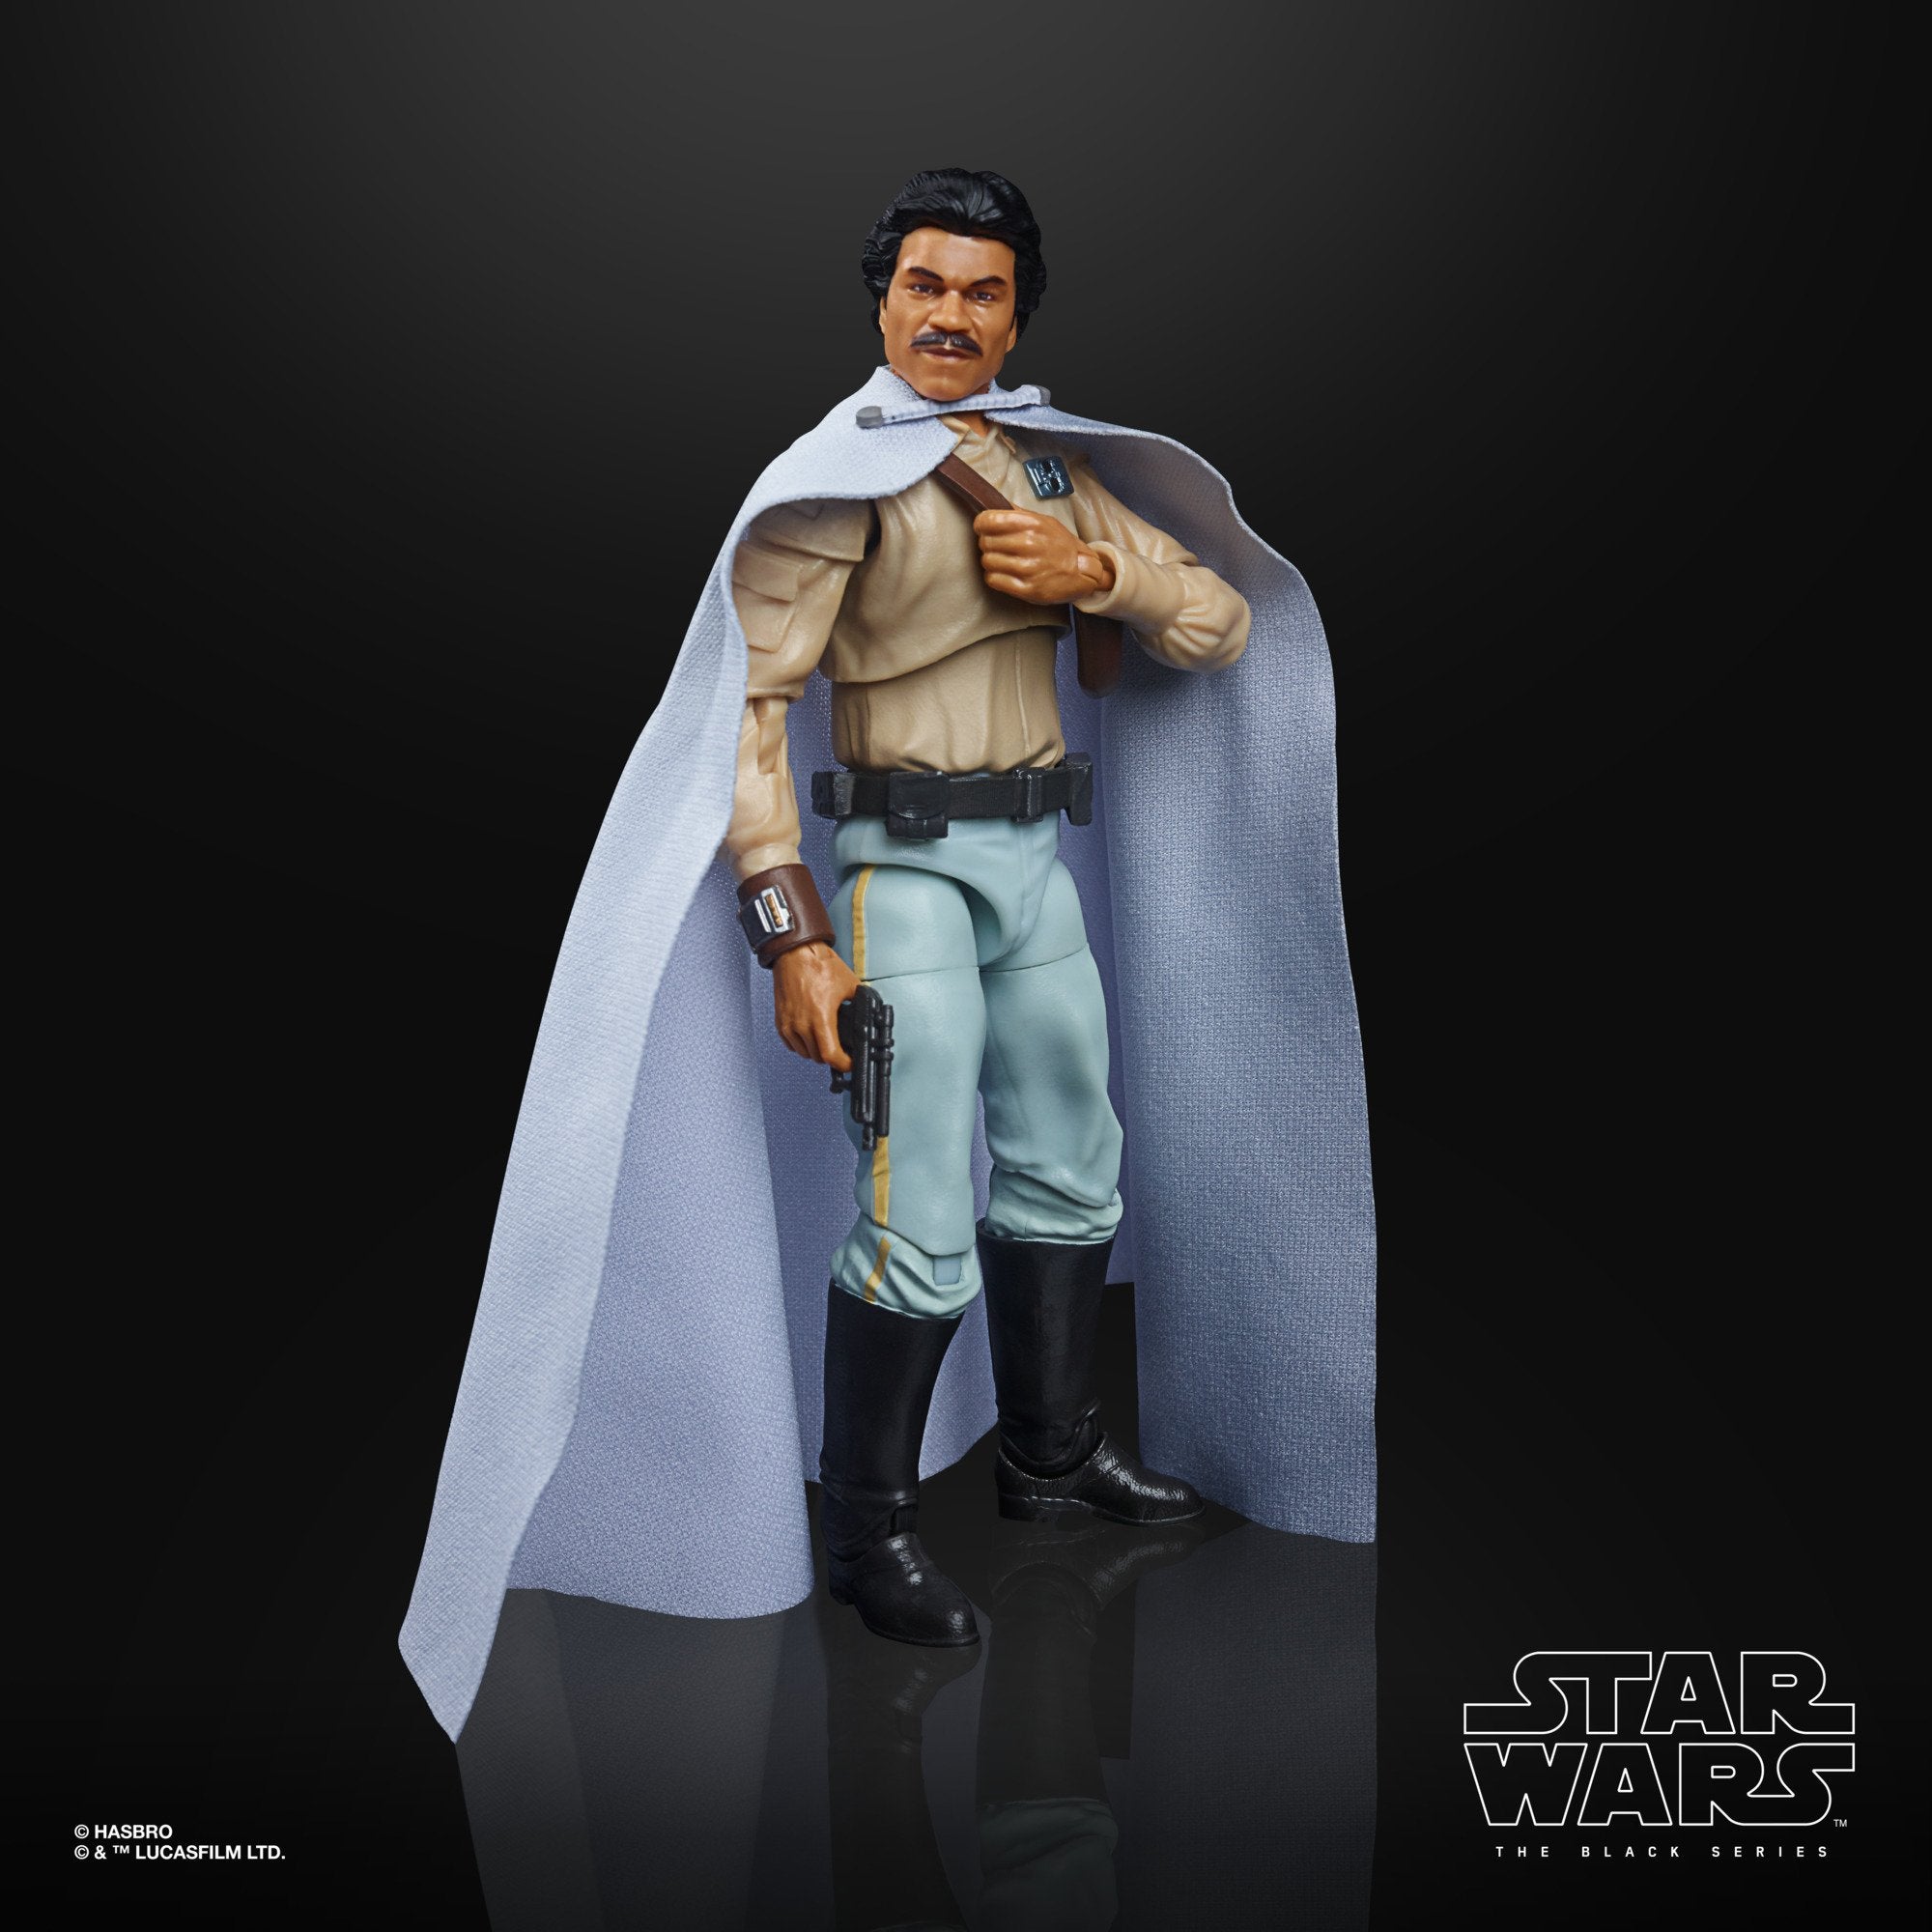 Star Wars The Black Series General Lando Calrissian Toy 6-Inch Scale Return of the Jedi Collectible Action Figure